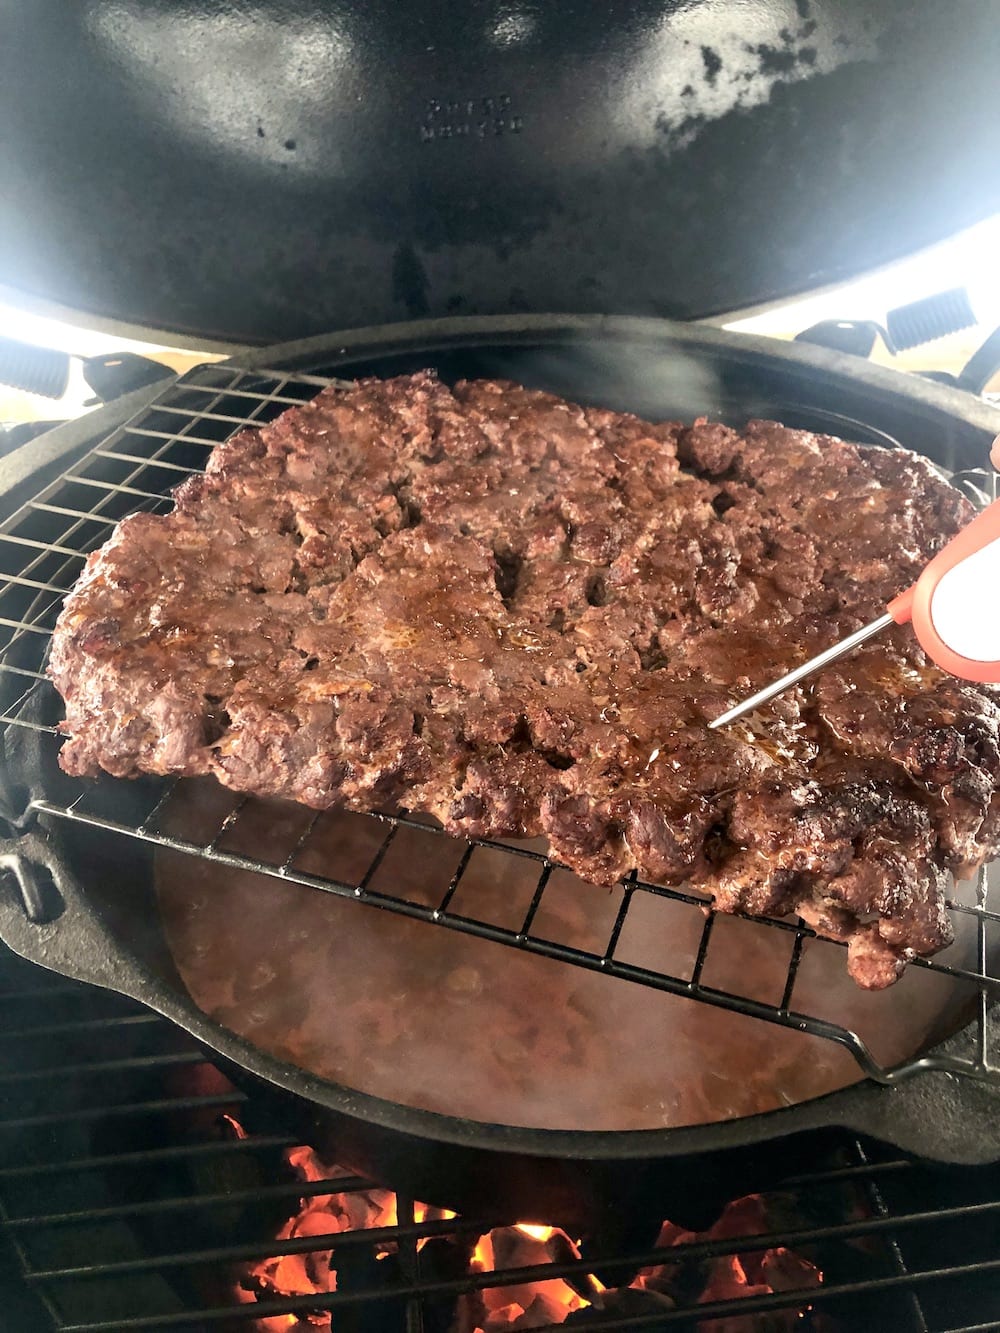 Checking chili meat on the grill with thermometer